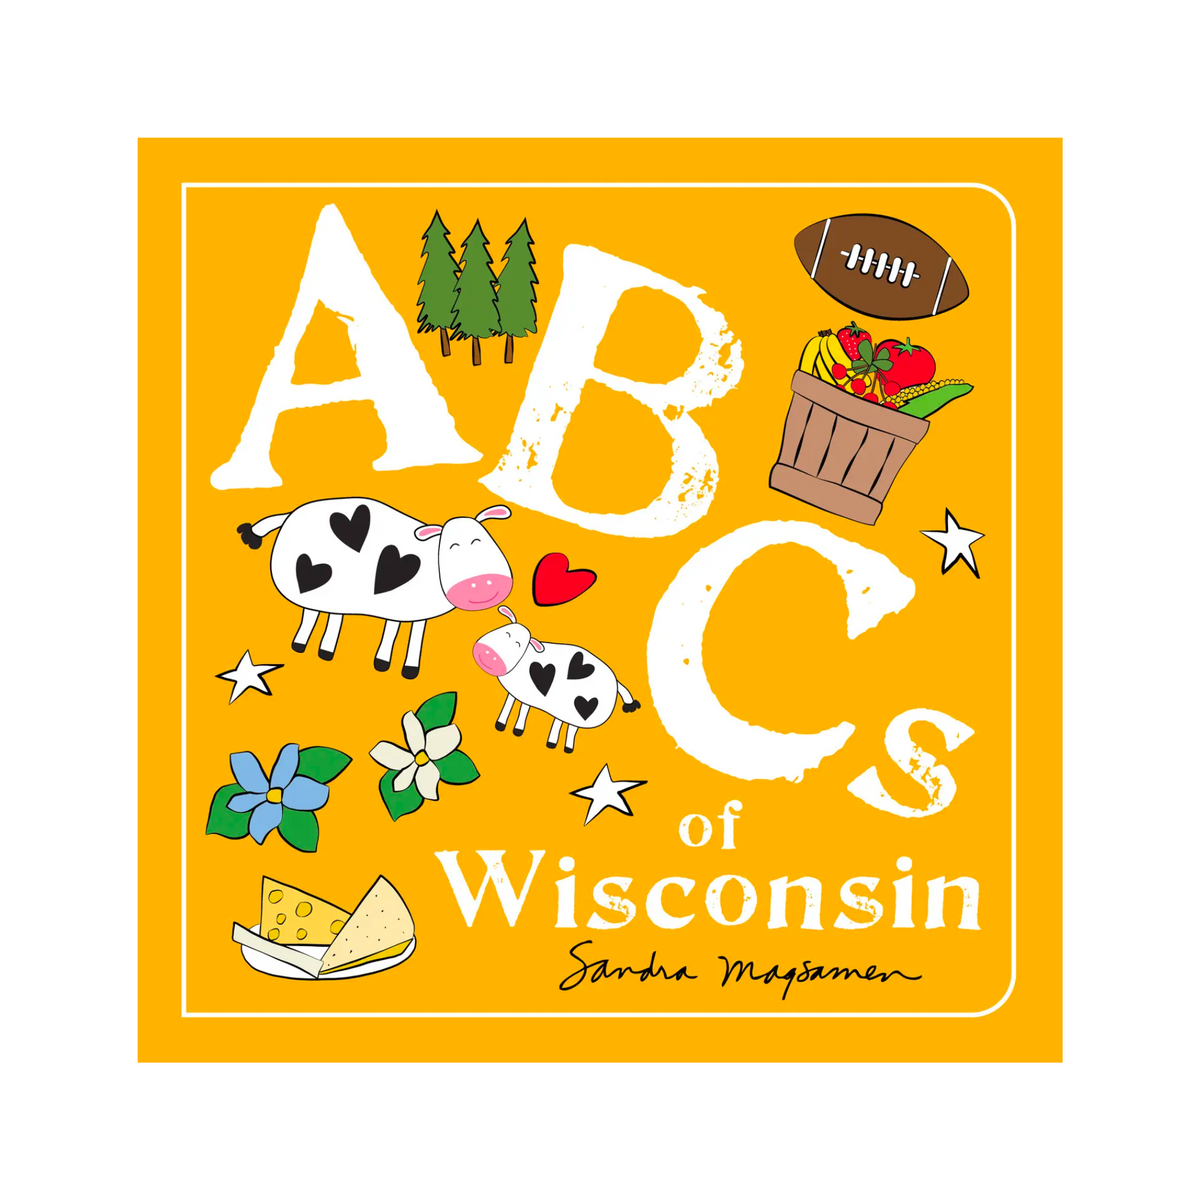 ABCs of Wisconsin Book